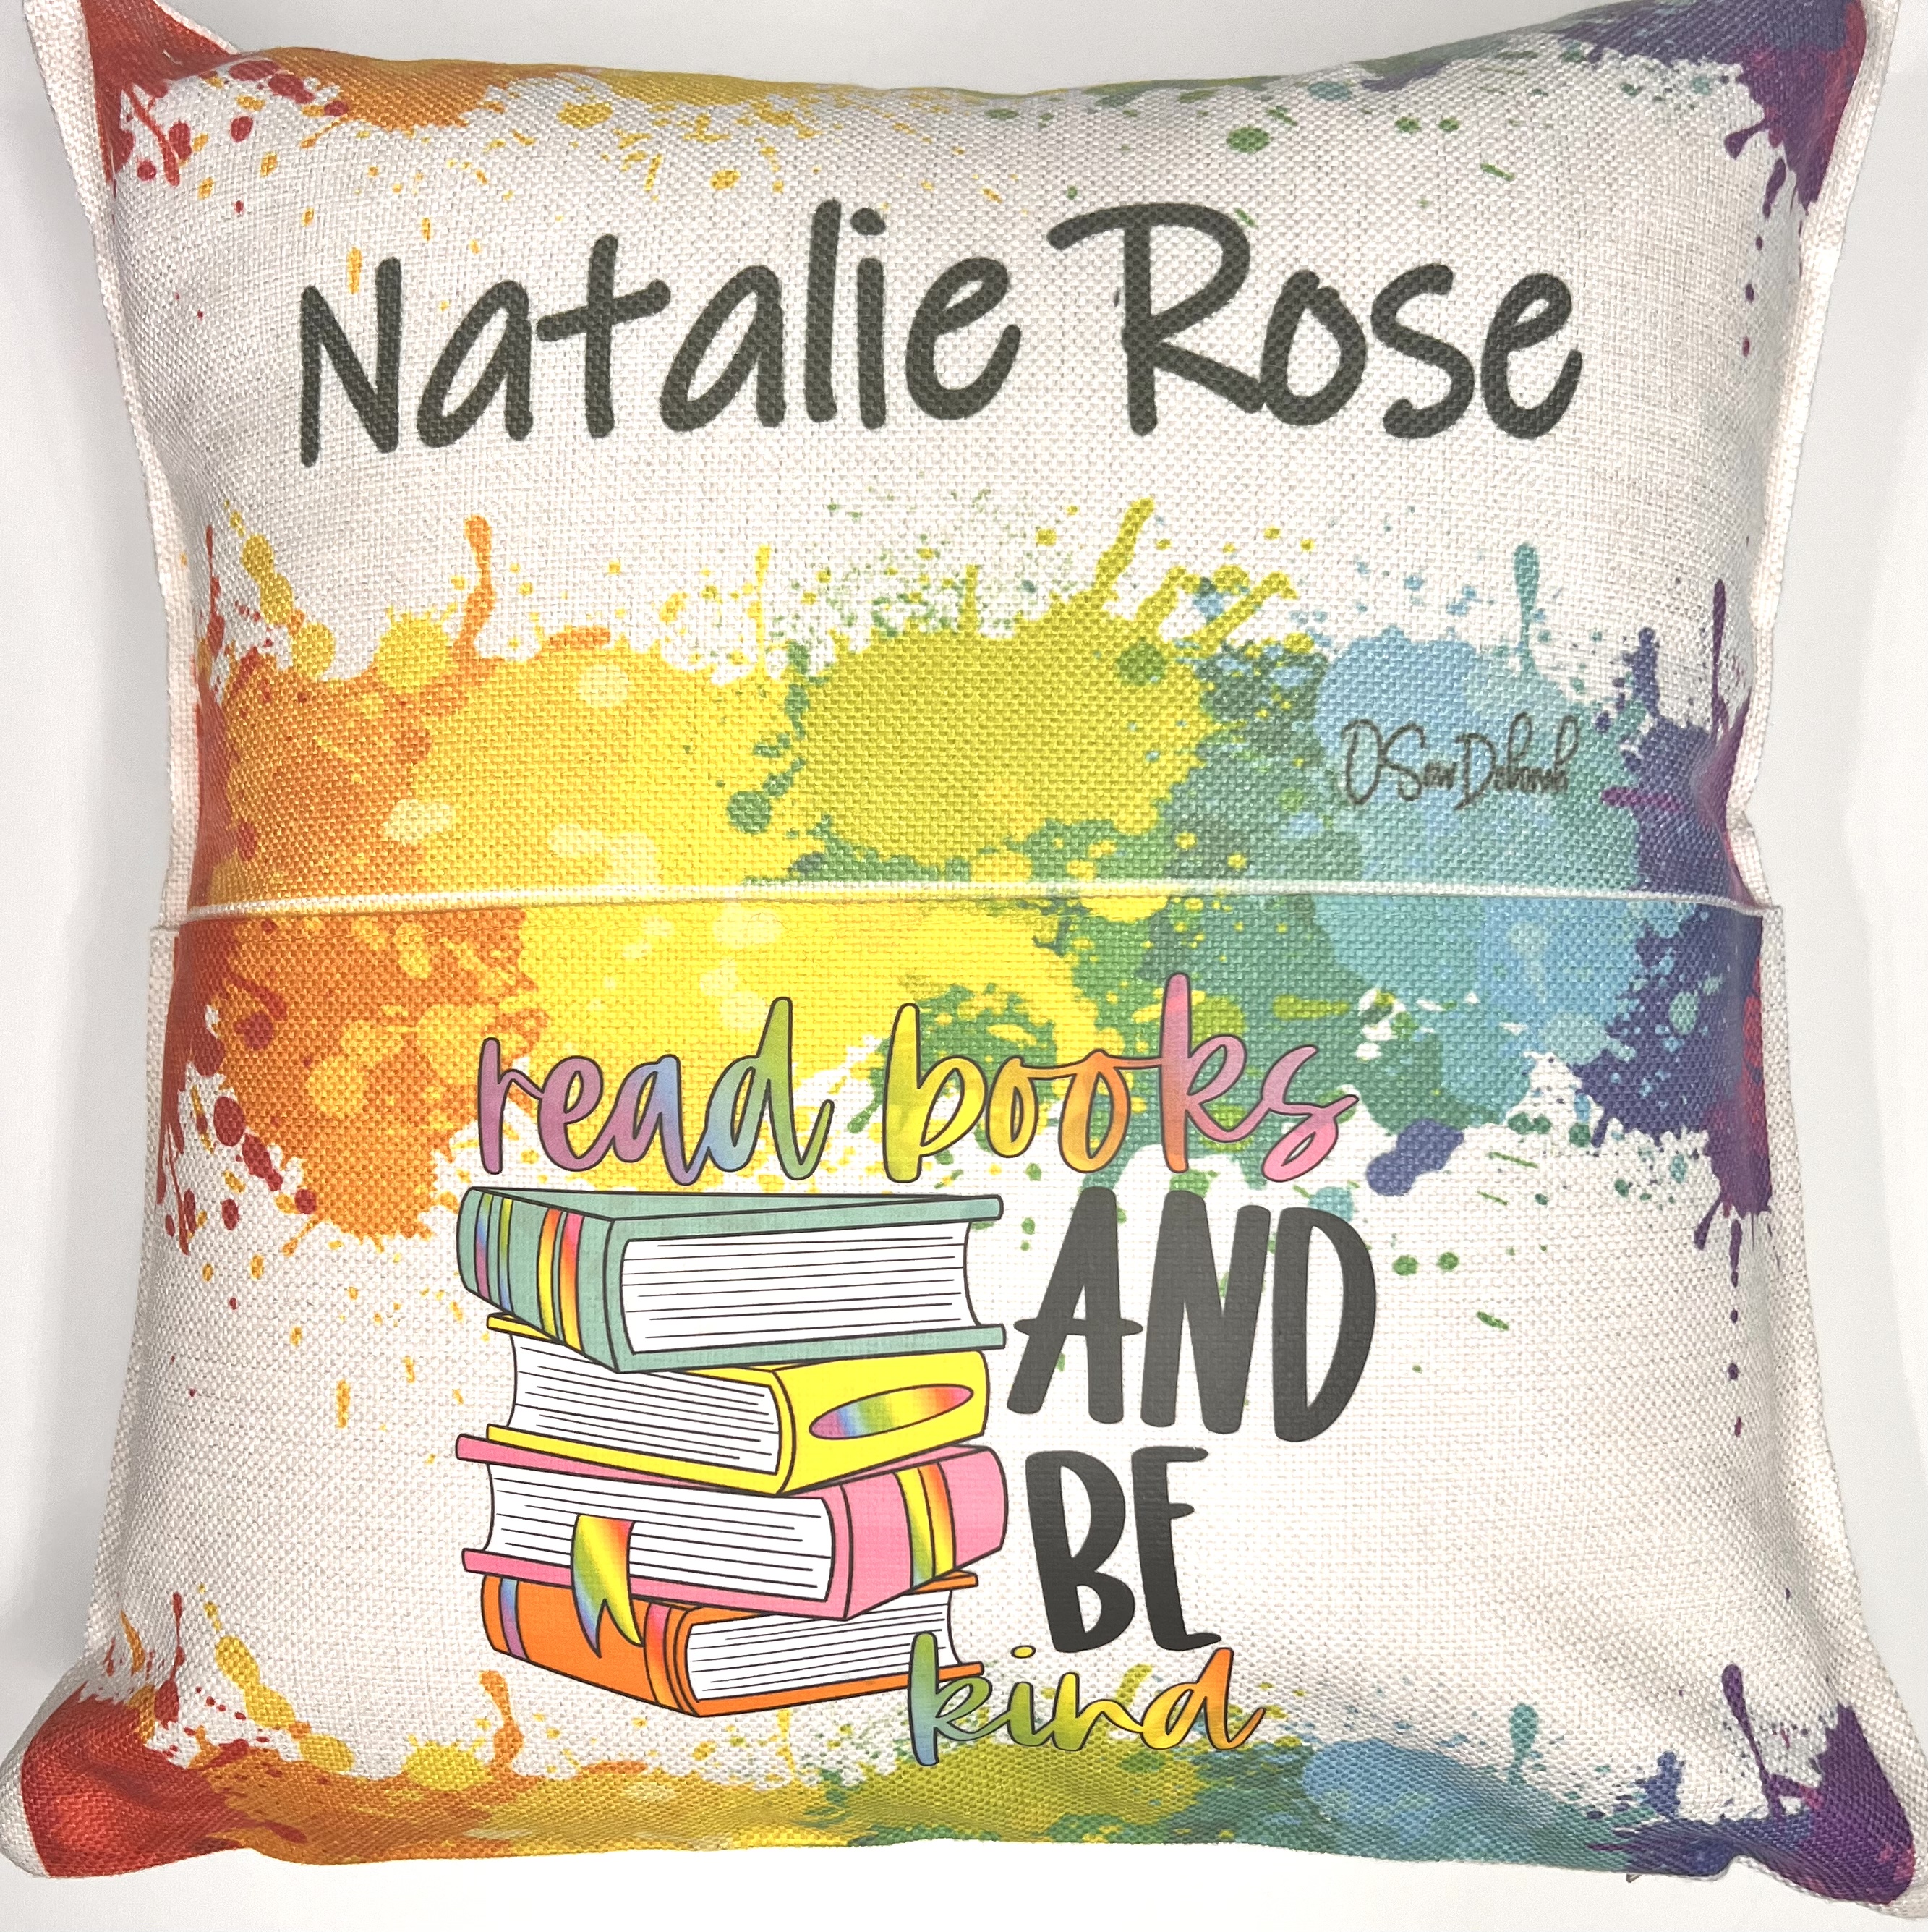 Pocket Book Pillow made with sublimation printing